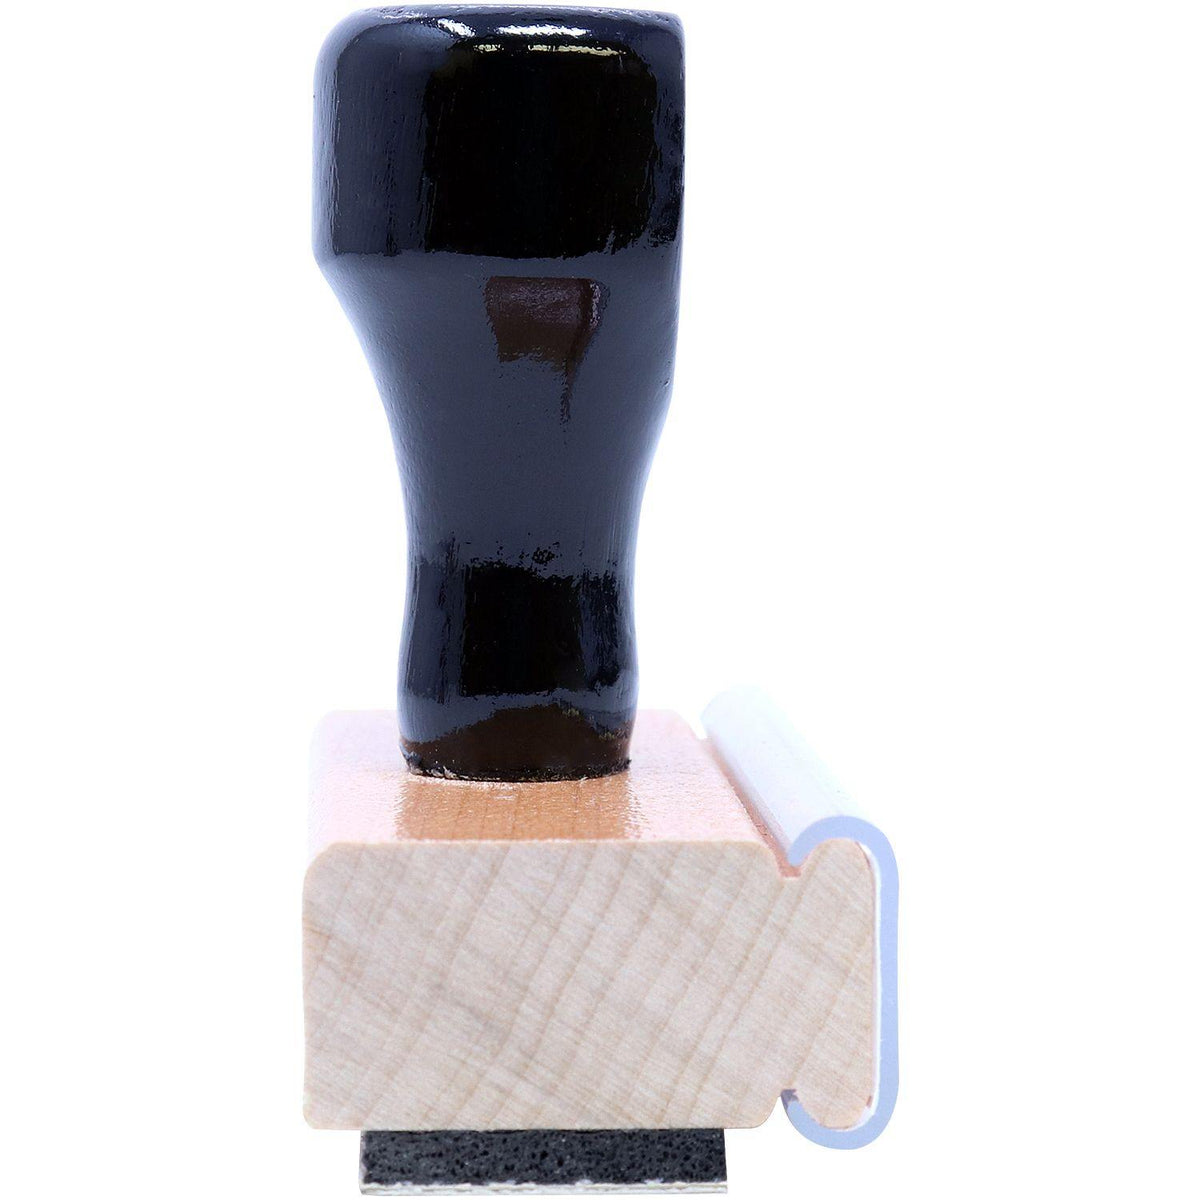 Large Two Thumbs Up Rubber Stamp - Engineer Seal Stamps - Brand_Acorn, Impression Size_Large, Stamp Type_Regular Stamp, Type of Use_Teacher